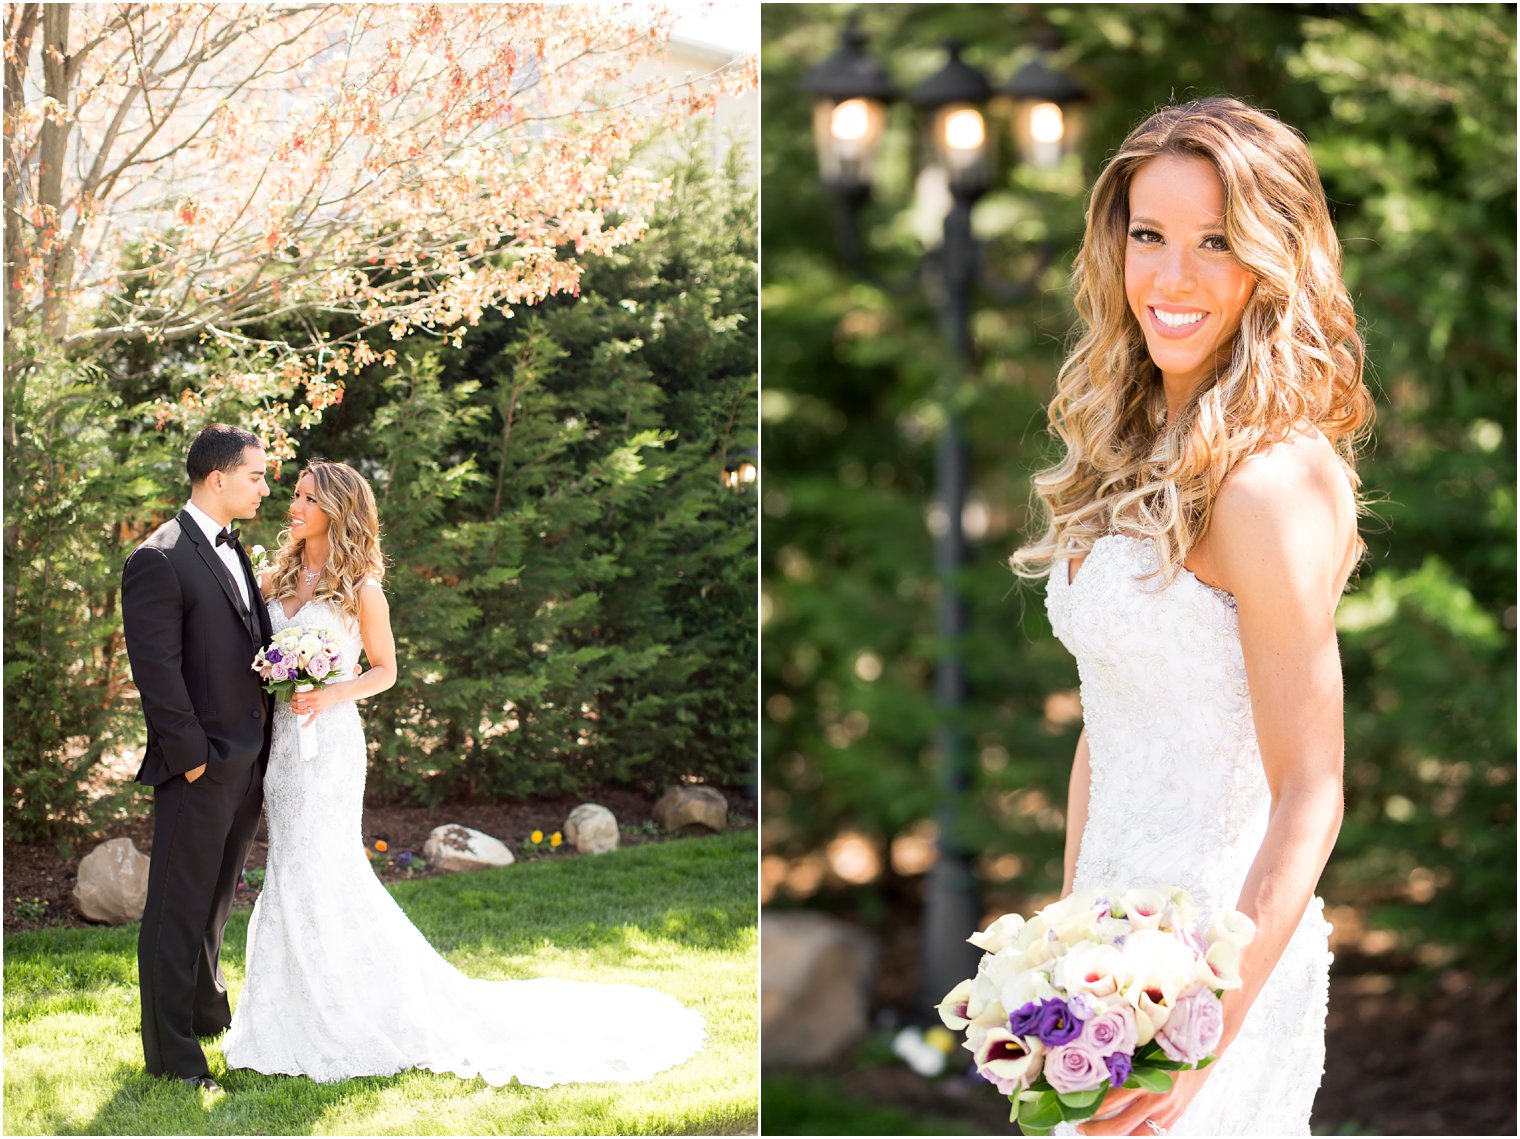 Bride and groom in spring wedding | Photos by Idalia Photography